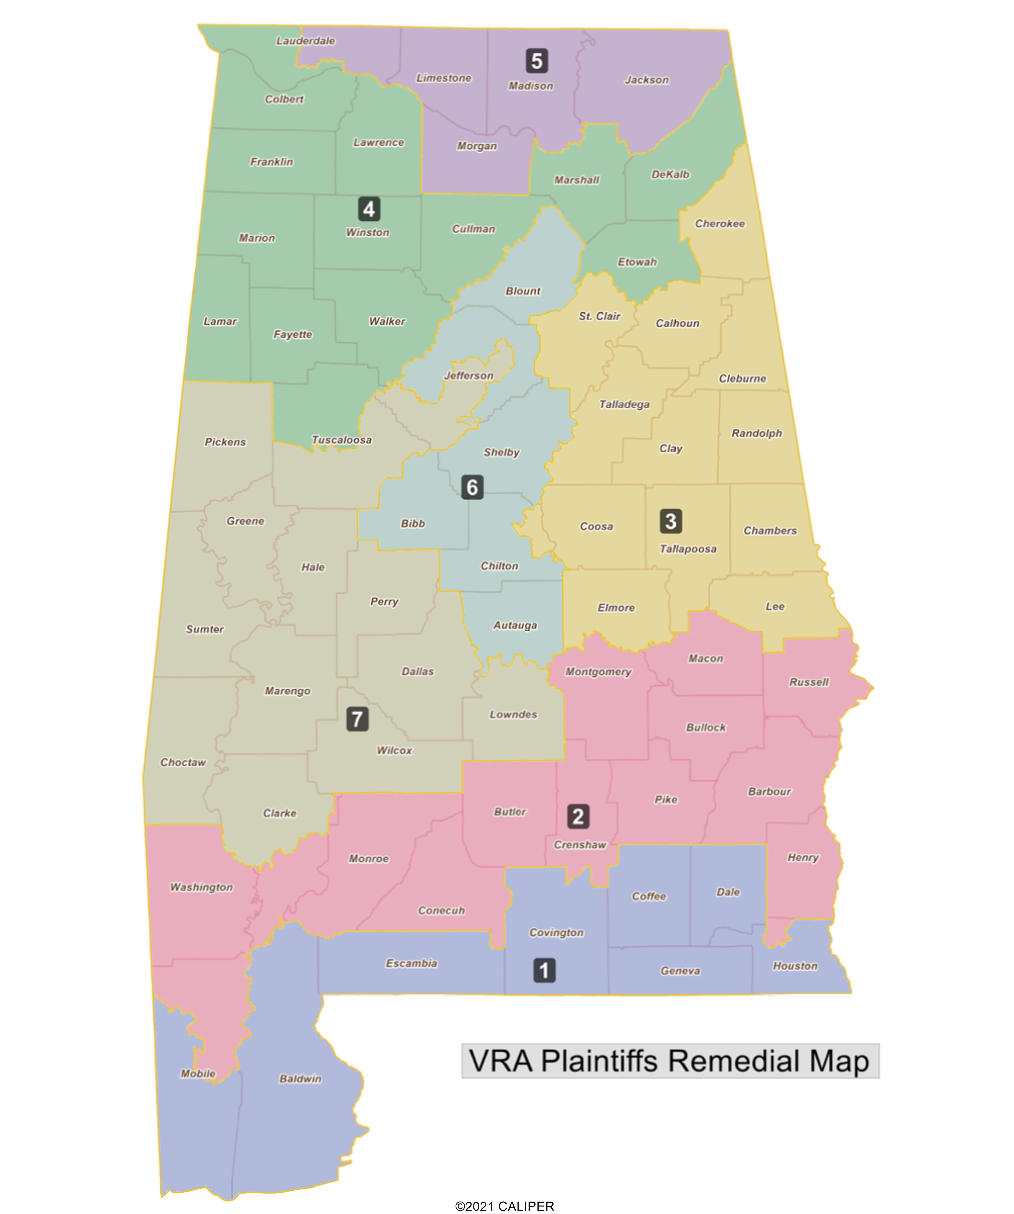 Redistricting plans revealed ahead of Tuesday hearing